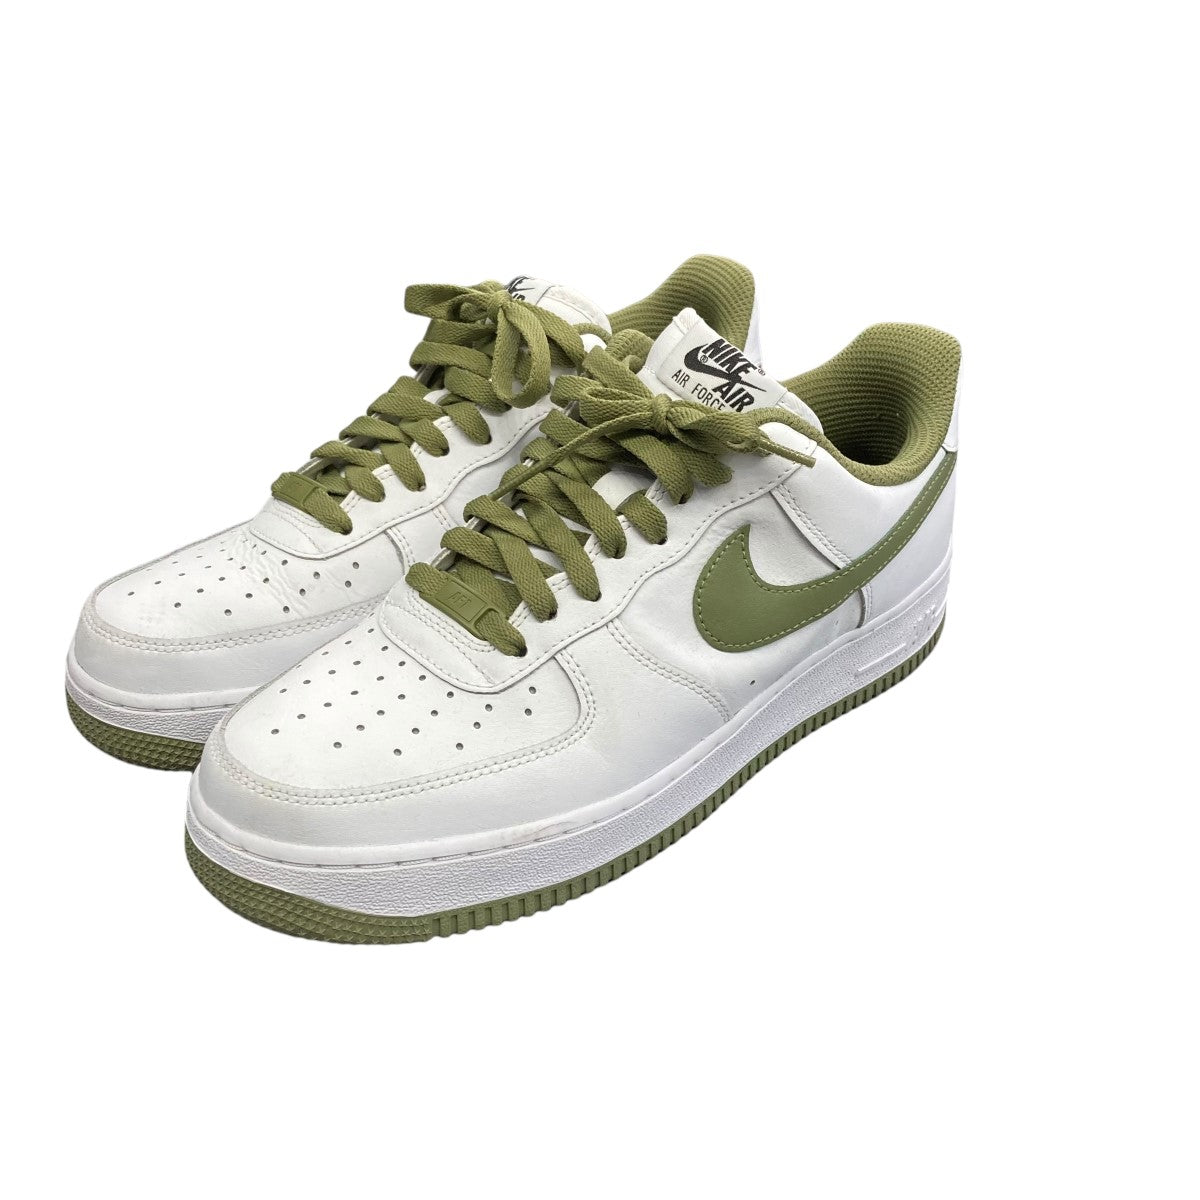 NIKE(ナイキ) AIR FORCE 1 By YouローカットスニーカーCT7875 